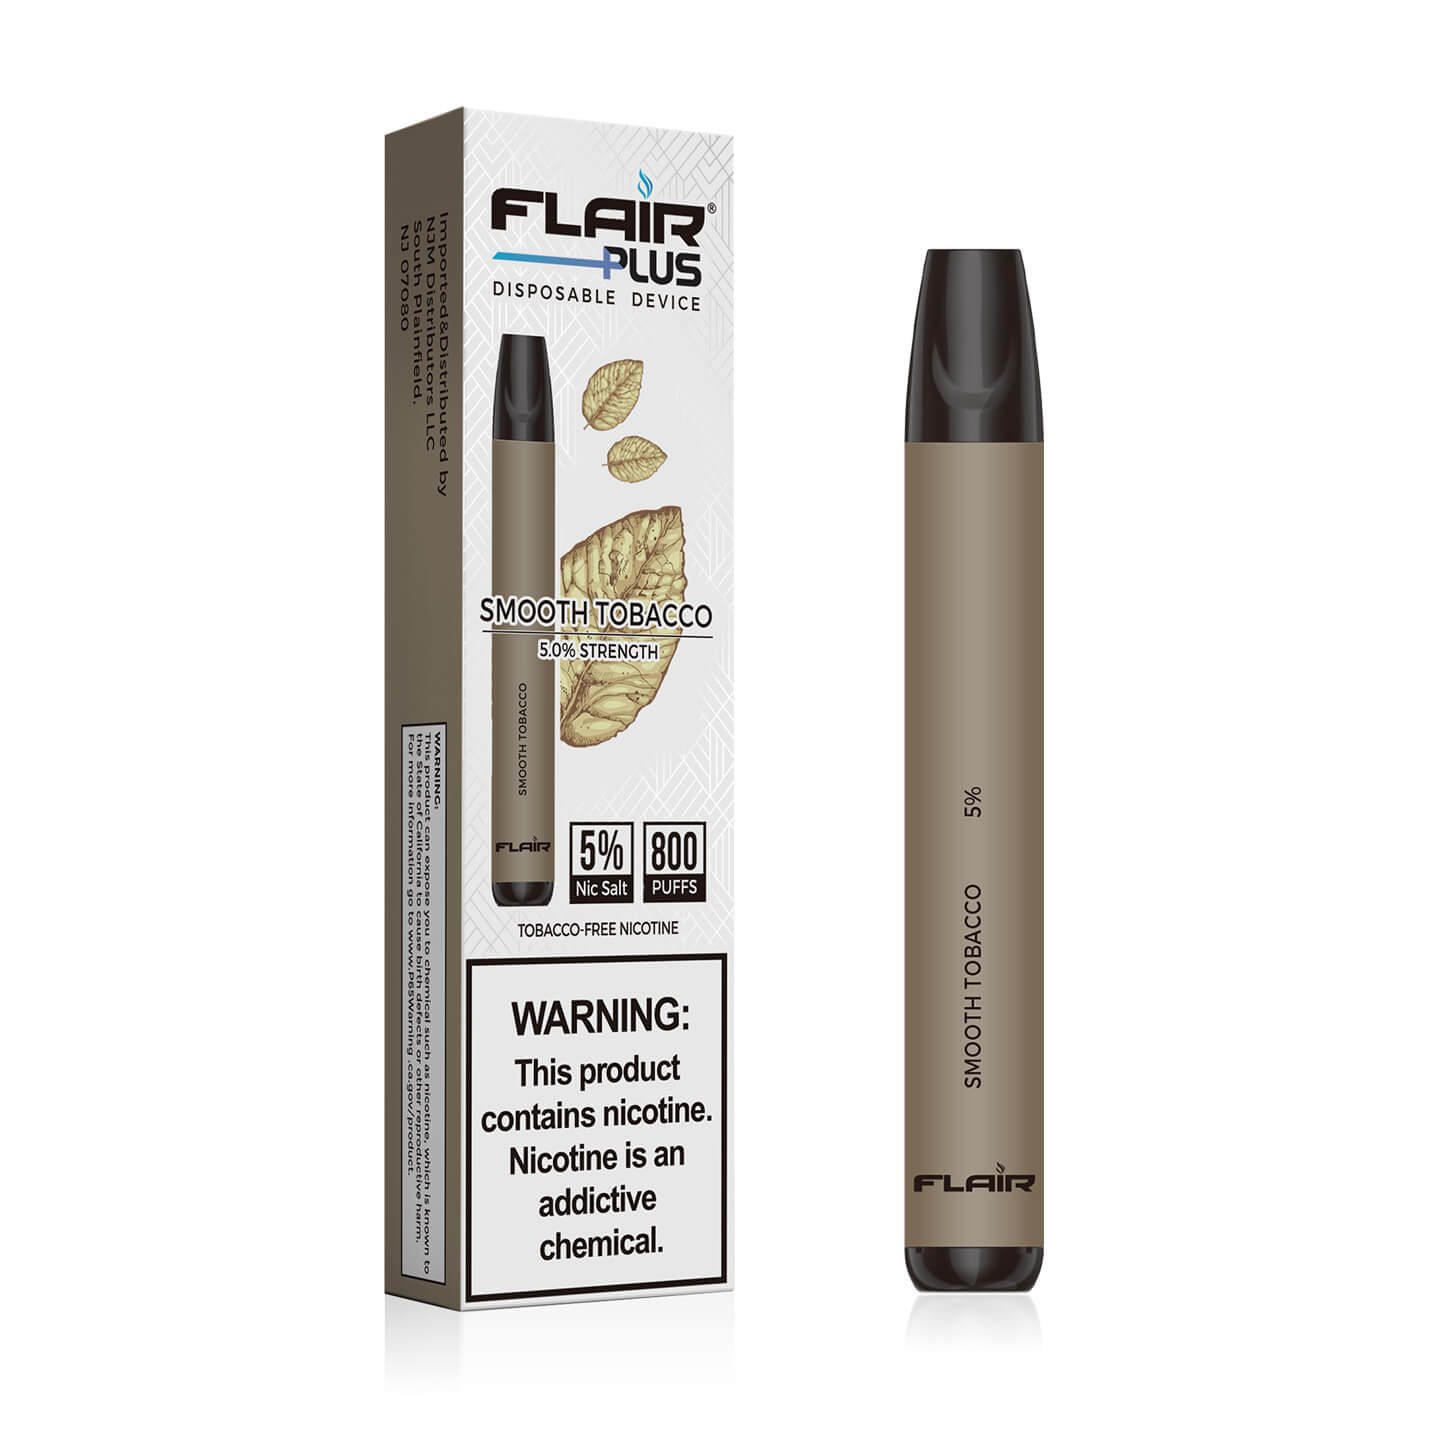 Flair Plus Disposable Devices (Smooth Tobacco - 800 Puffs)